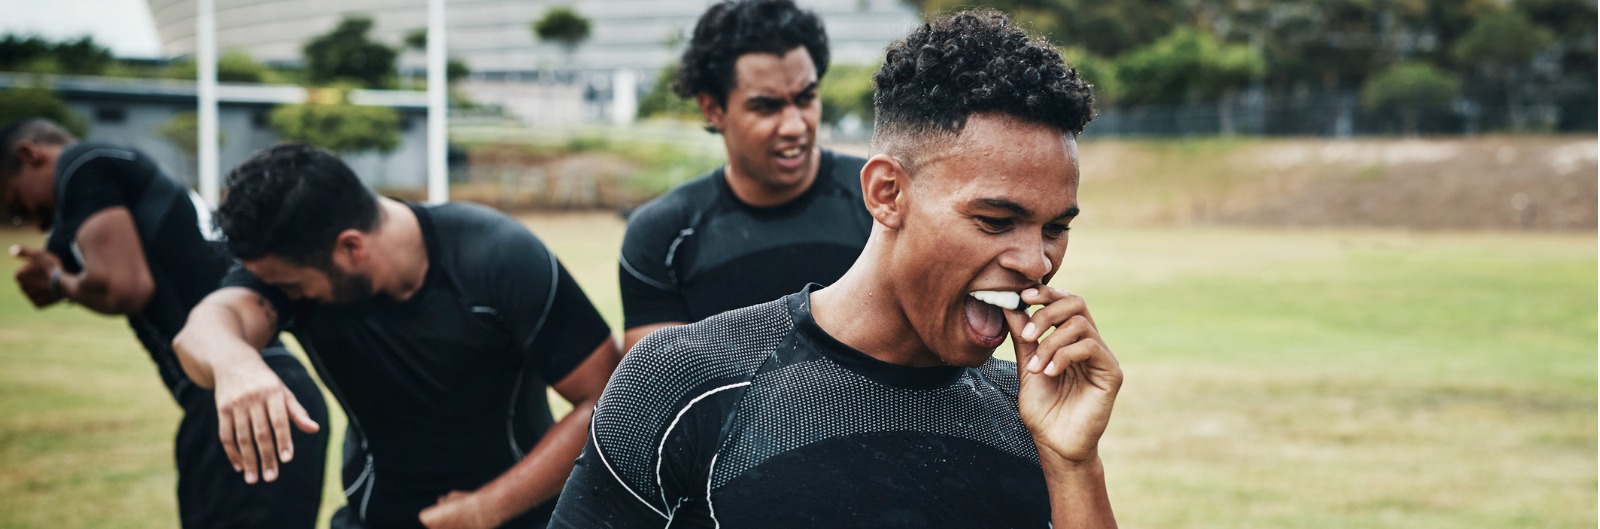 An athlete putting in a mouth guard